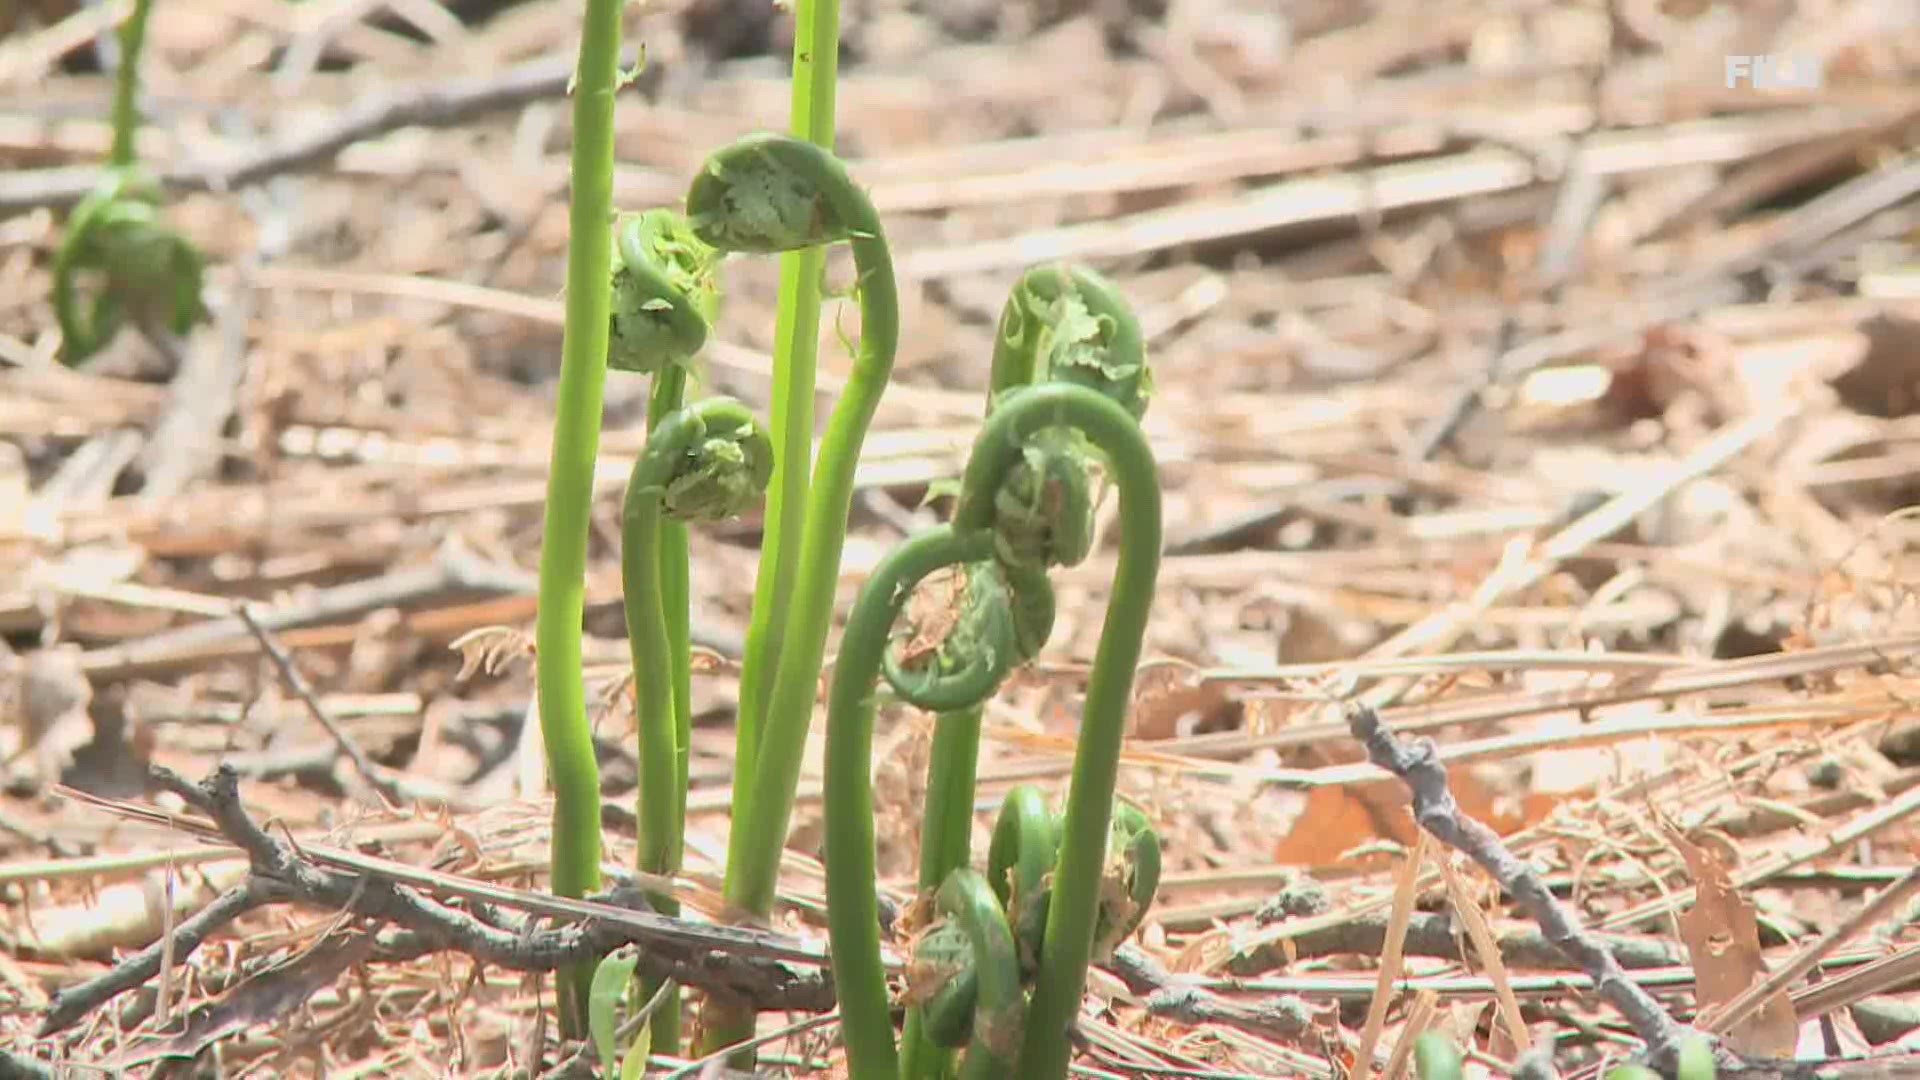 One study is showing that over-harvesting can lead to a decline in Fiddlehead numbers.